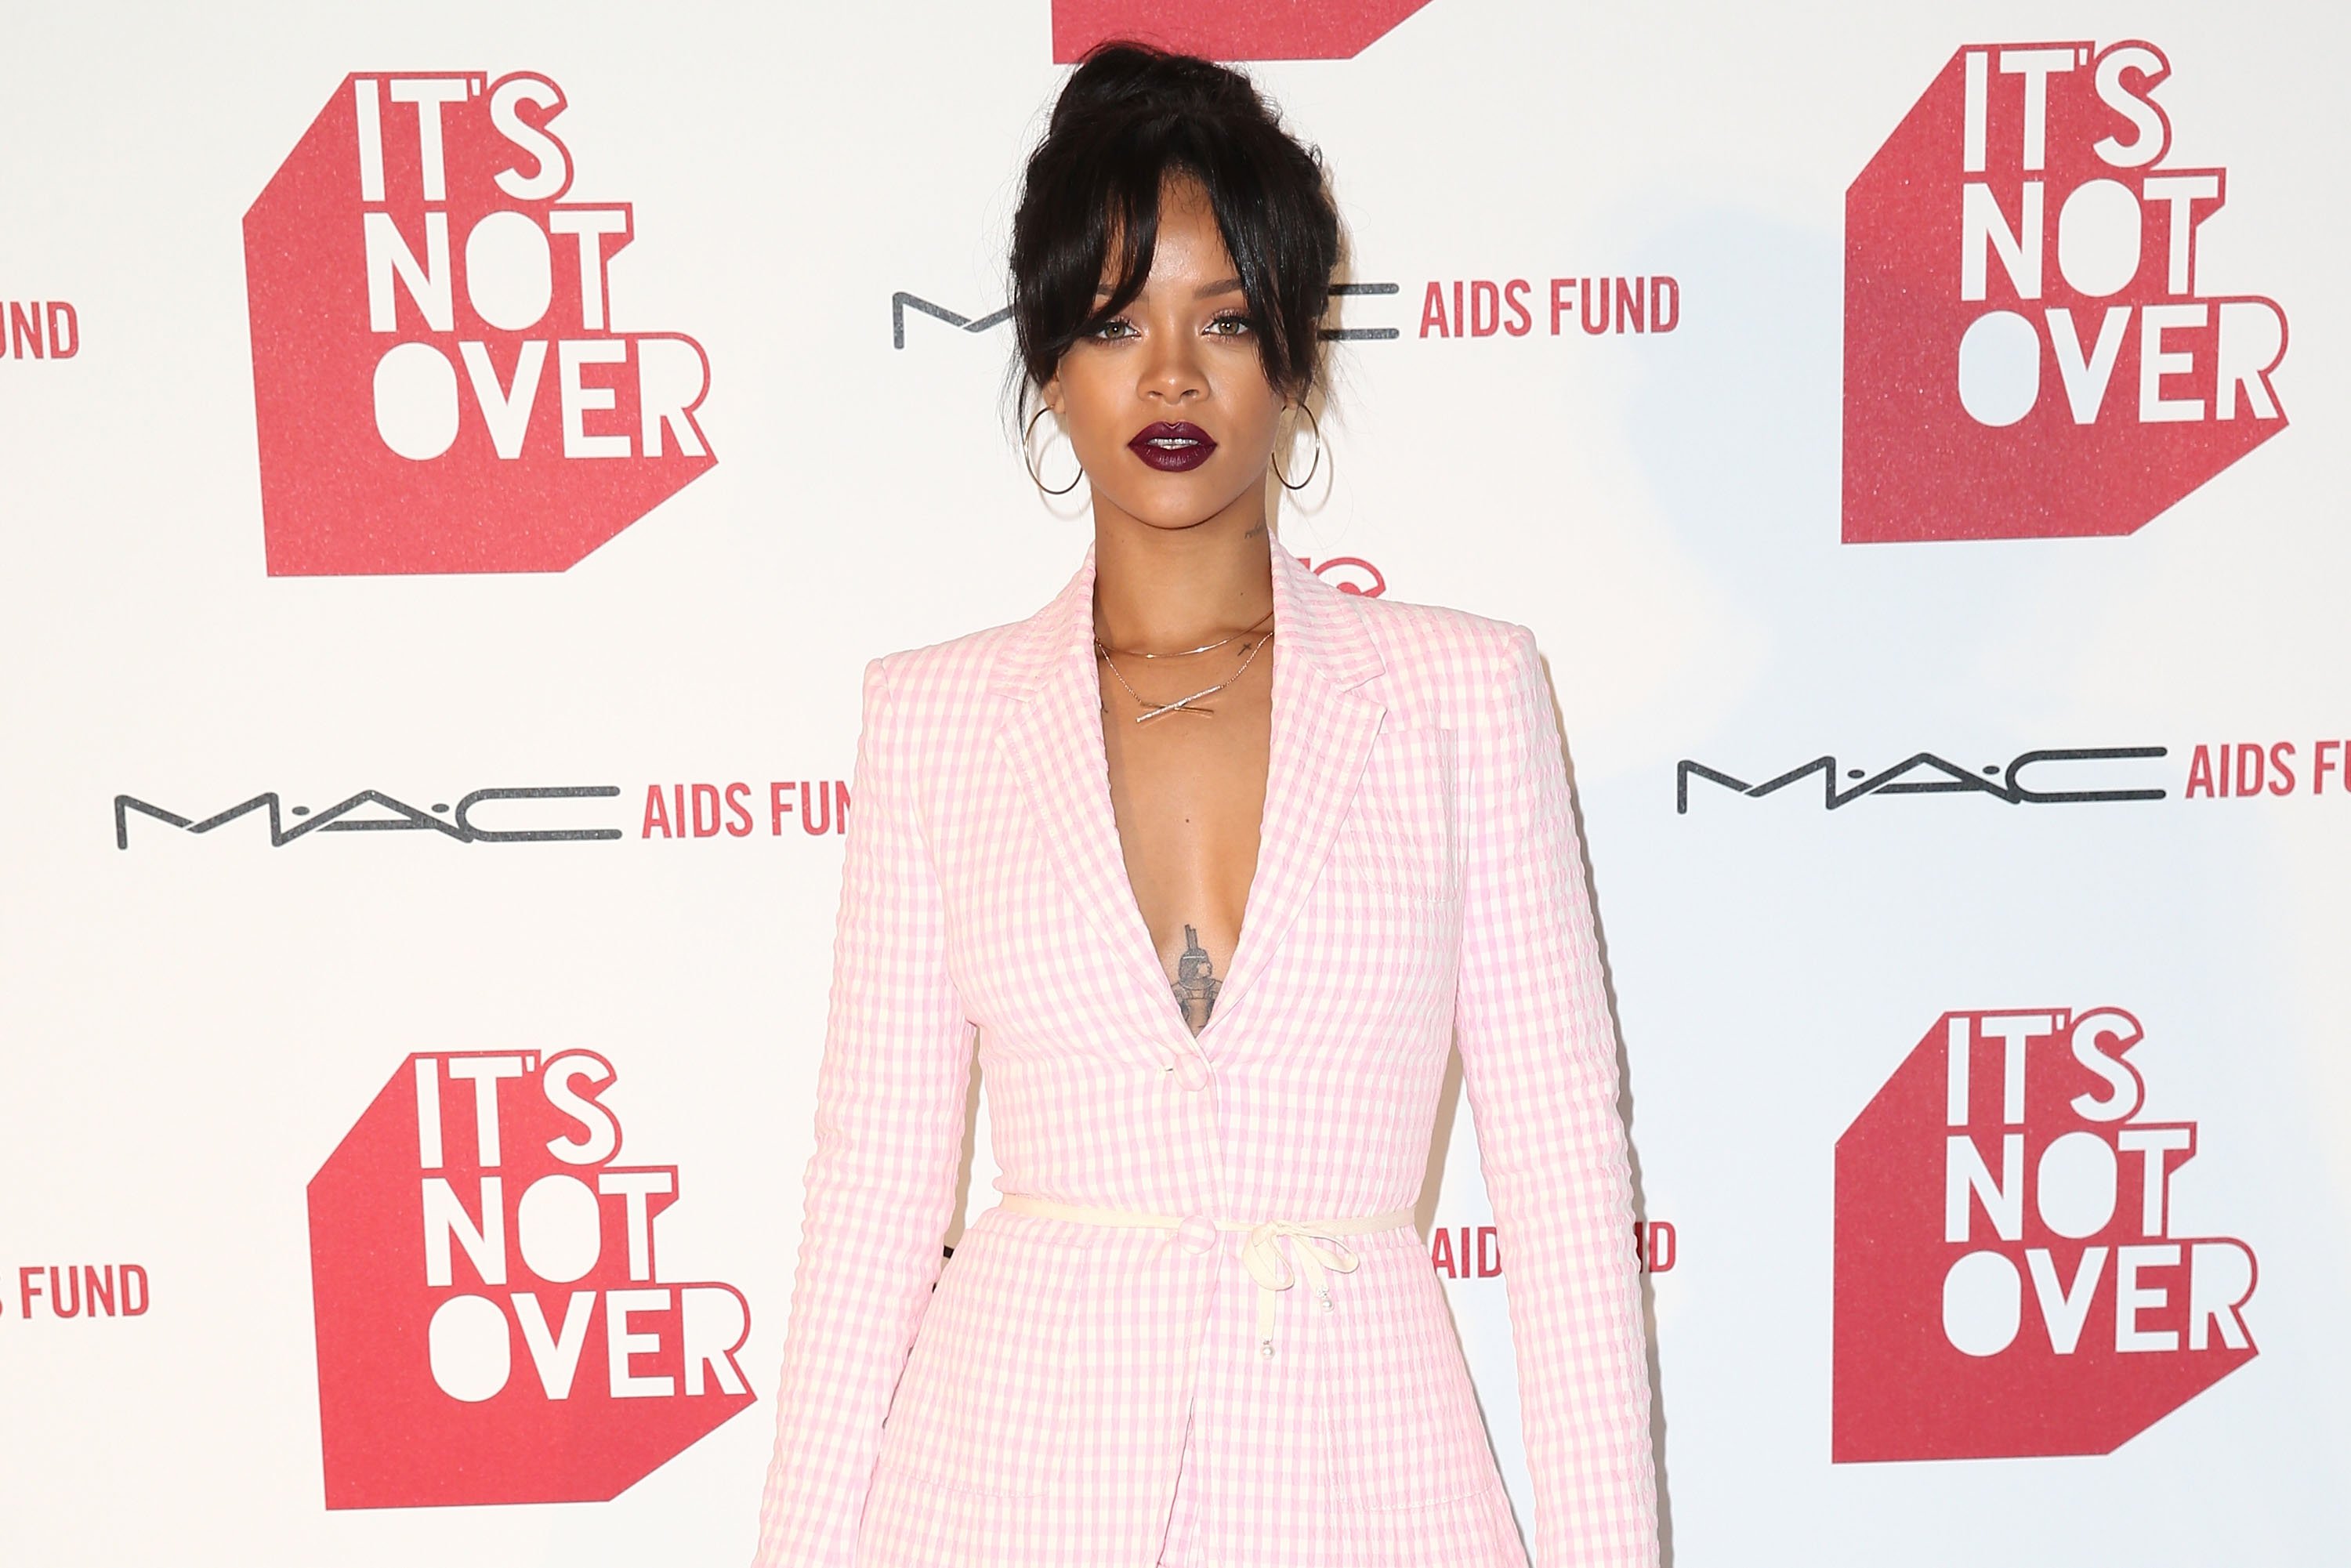 Rihanna attends the premiere of 'It's Not Over' presented by MAC Cosmetics and MAC AIDS Fund on November 18, 2014. | Photo: GettyImages